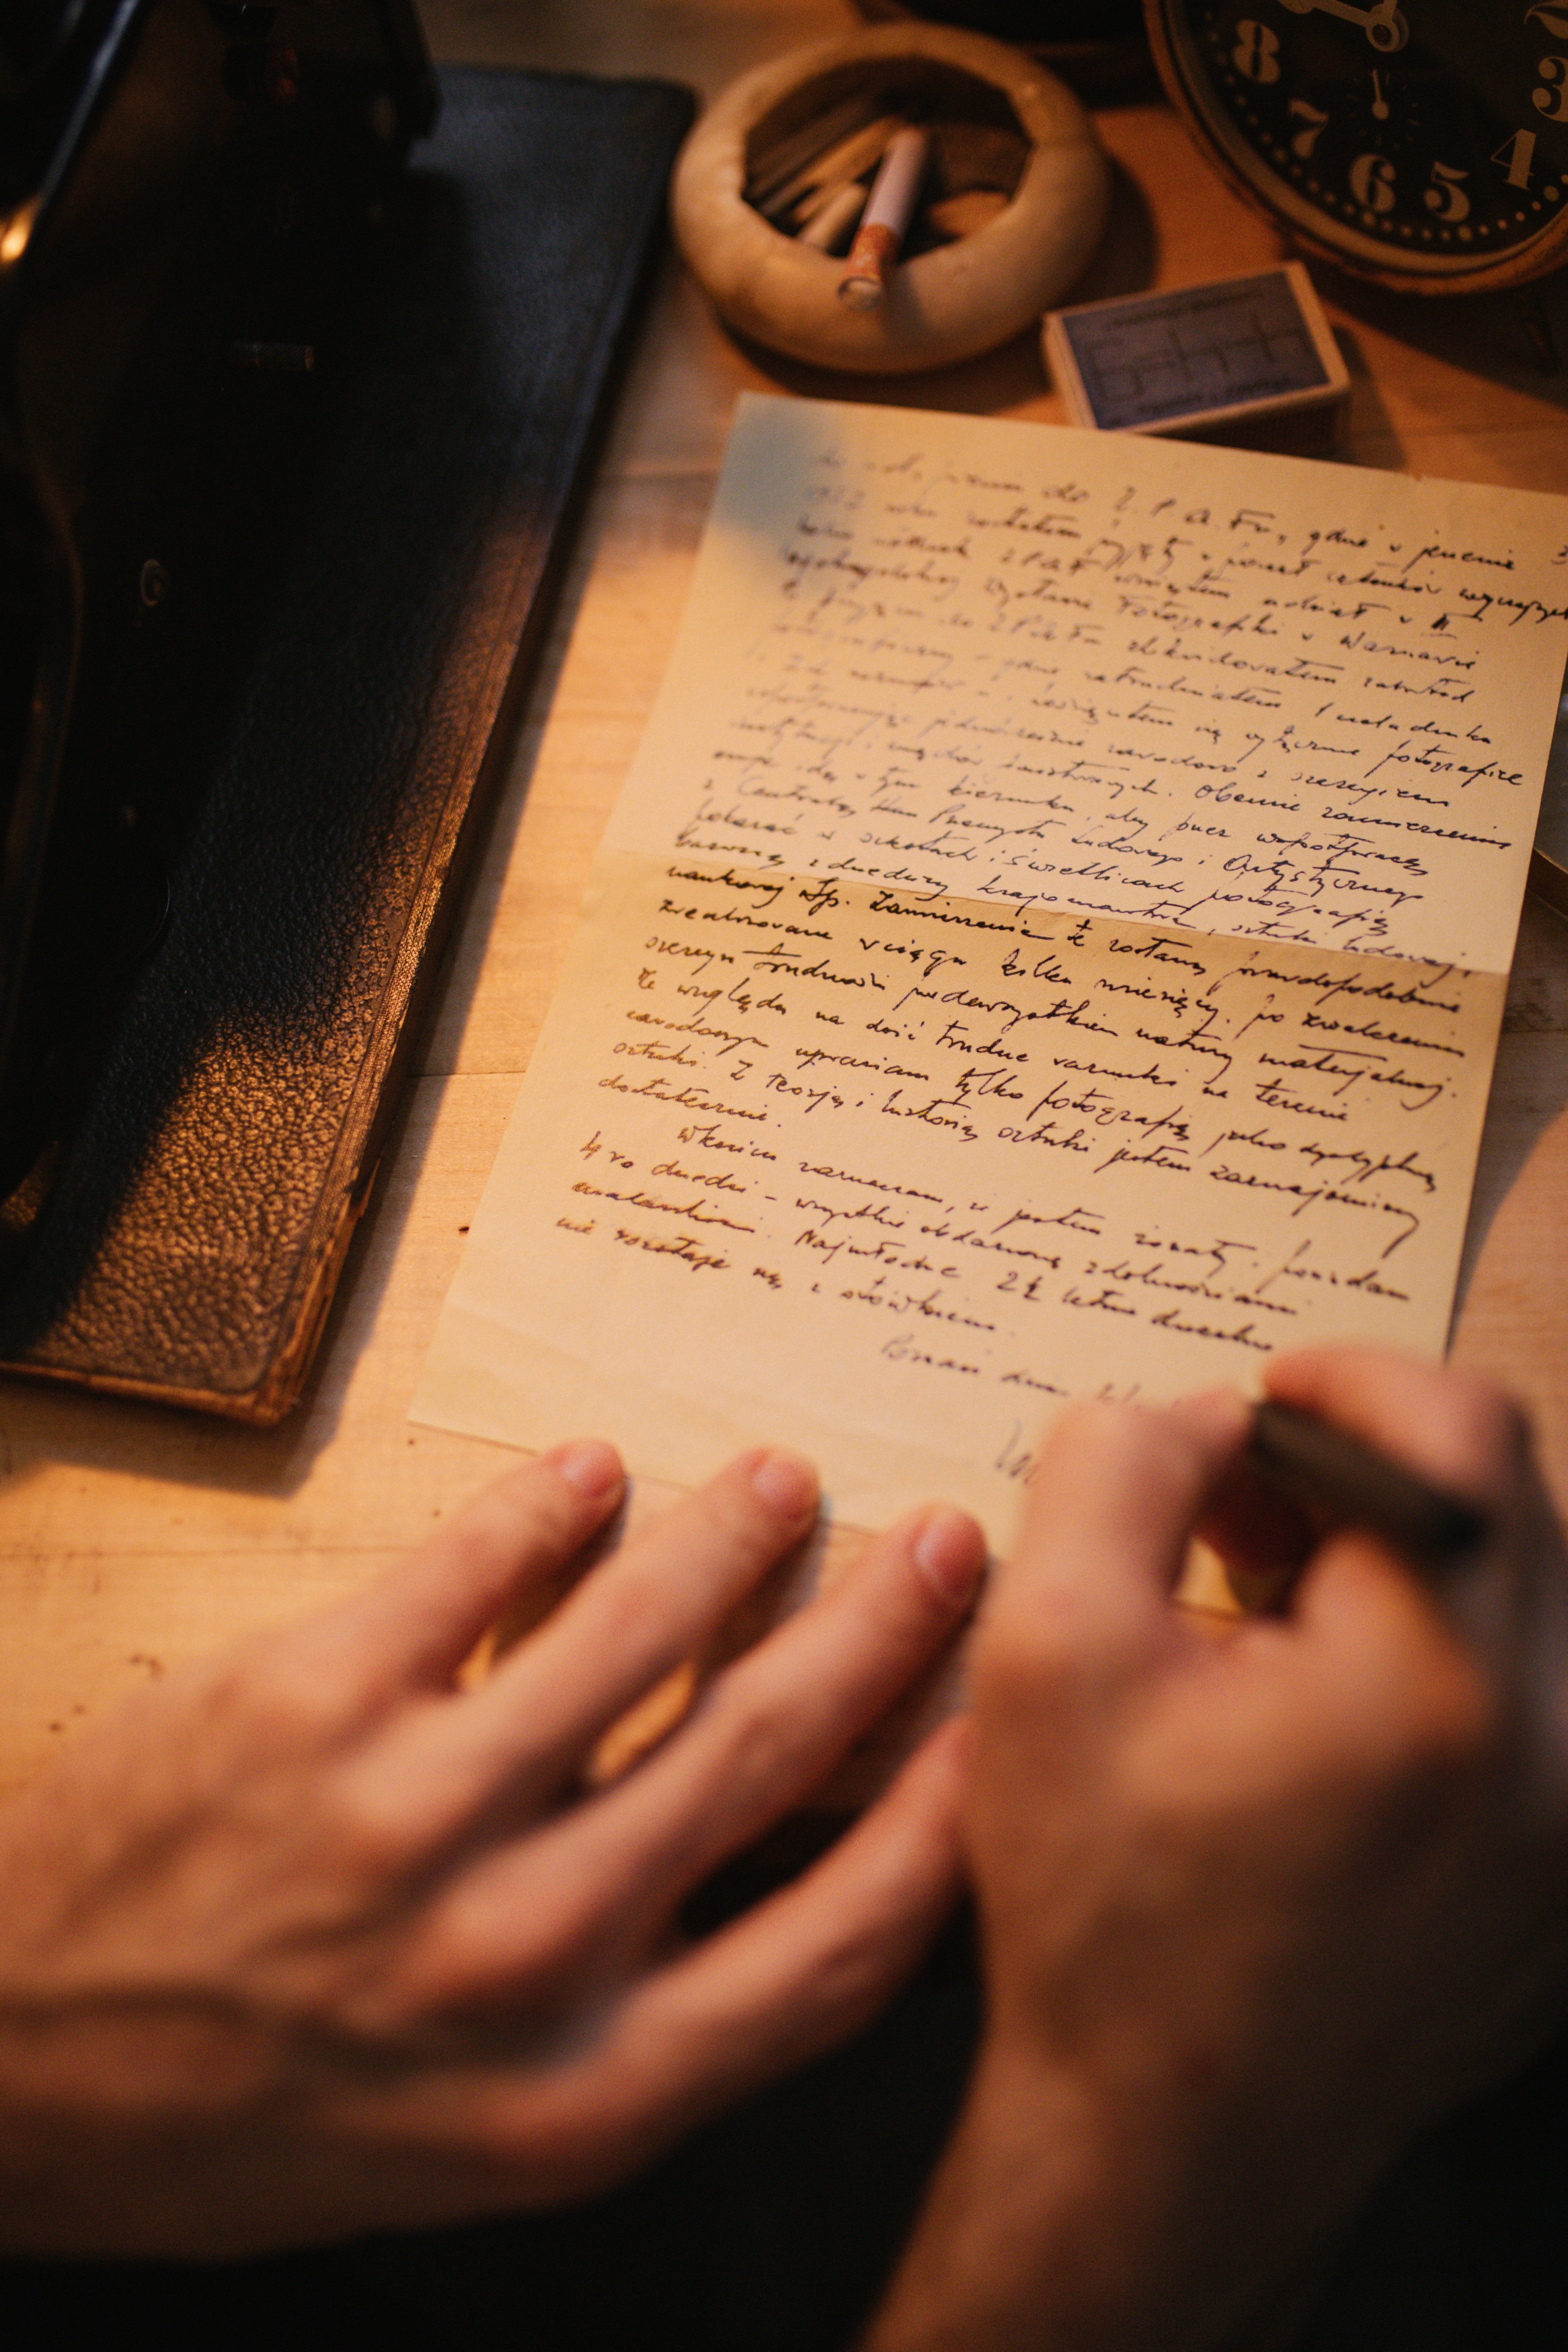 Kyle received a handwritten letter | Photo: Pexels